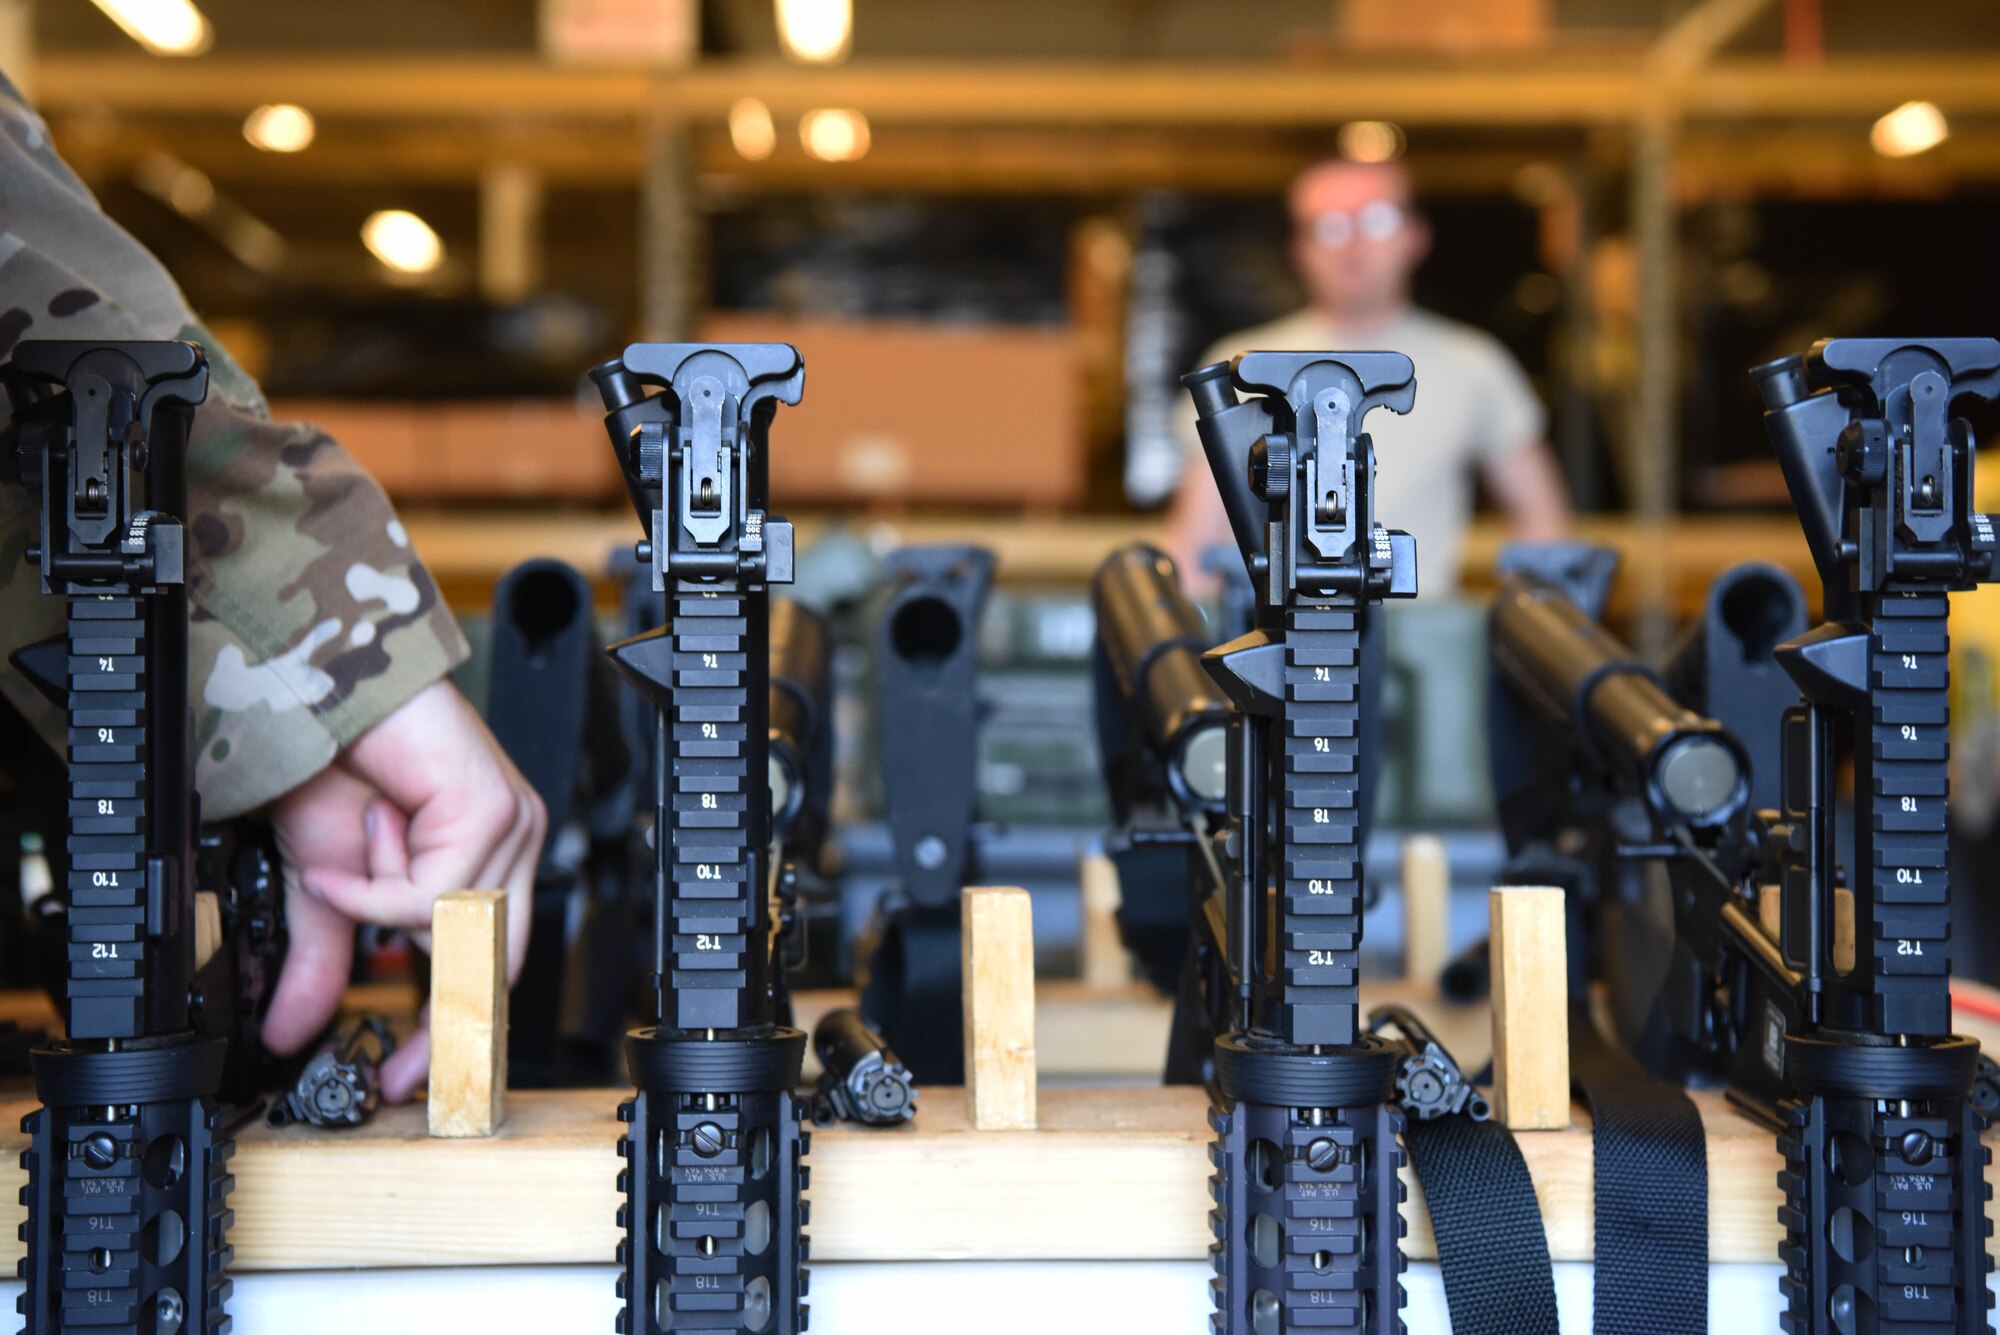 M4 carbines are disassembled to ensure they are in the proper condition at Ellsworth Air Force Base, S.D., Sept. 10, 2018. Members assigned to the 28th Security Forces Squadron combat arms training and maintenance flight conducted their biannual inspection of all weapons on base to ensure they are ready for use in a deployed environment and for training purposes. (U.S. Air Force photo by Airman 1st Class Thomas Karol)